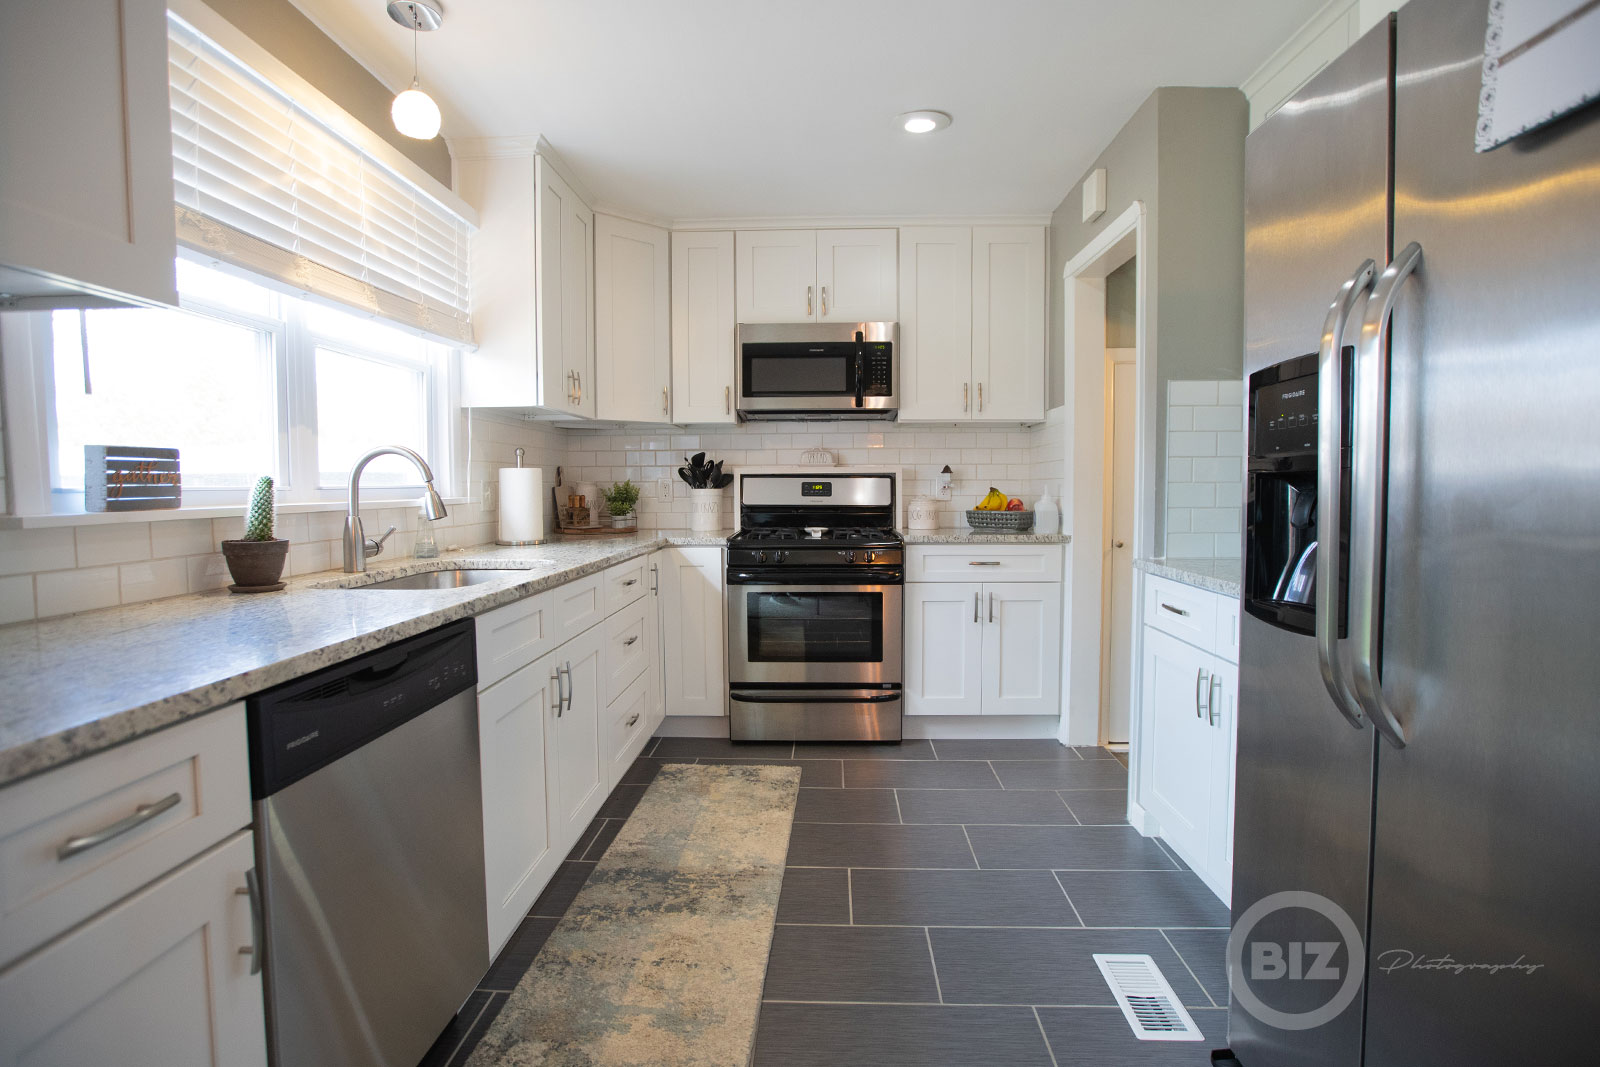 kitchen, real estate, real estate photography, home listing, sell your house, Biz photography llc, cleveland, Ohio